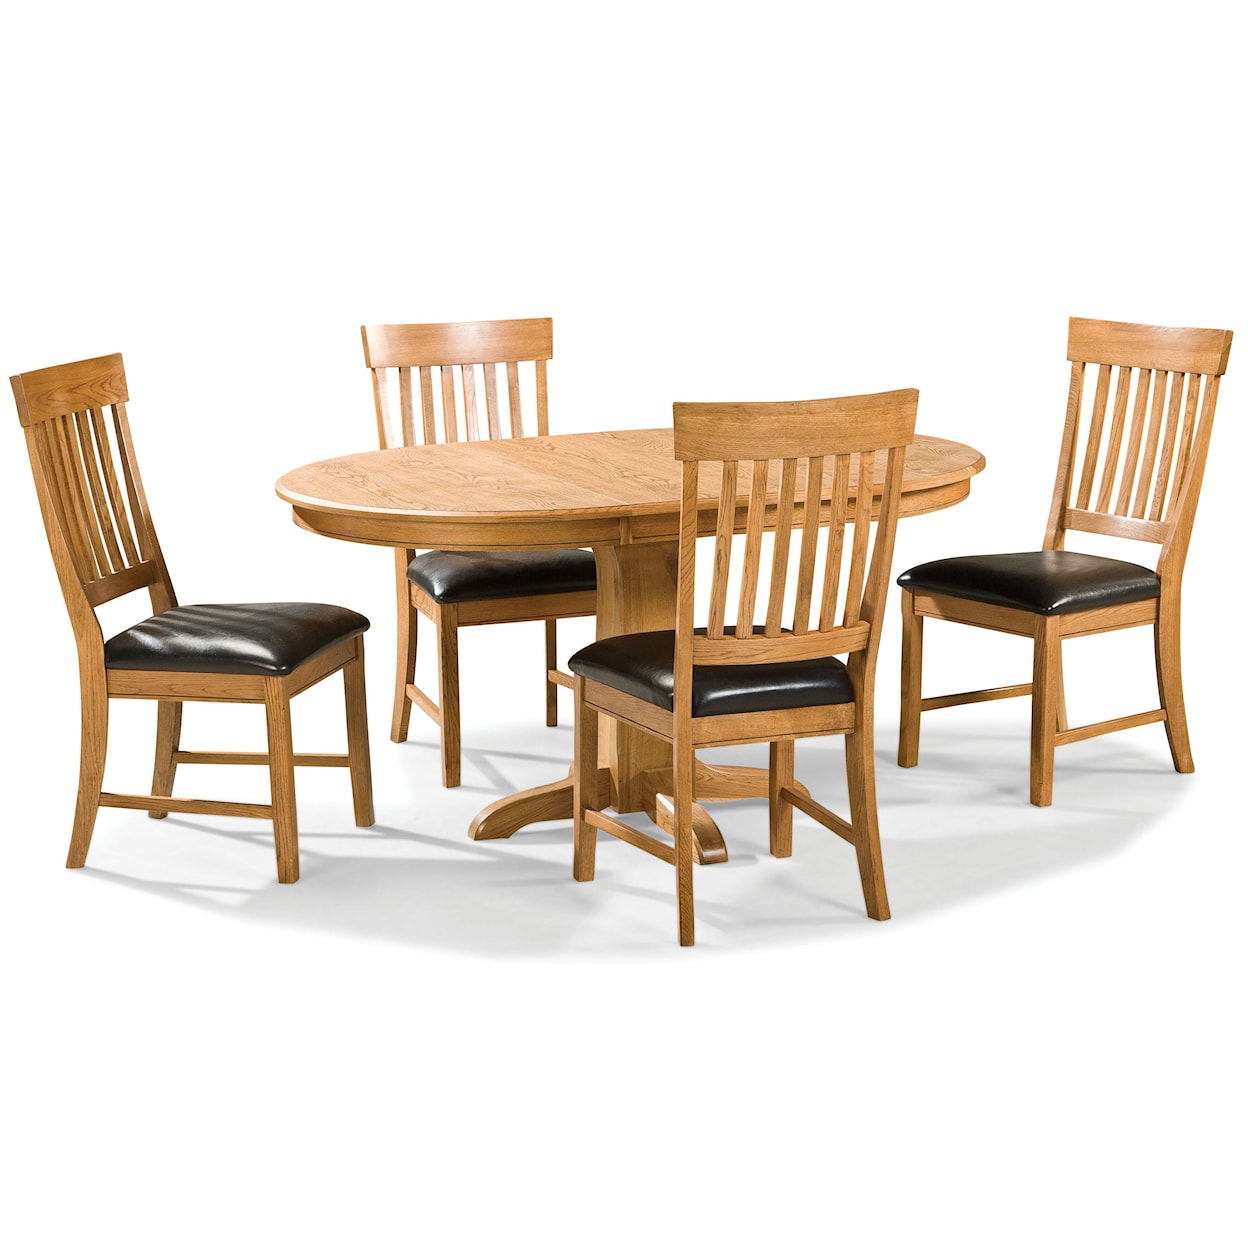 VFM Signature Family Dining Dining Chair with Slat Back